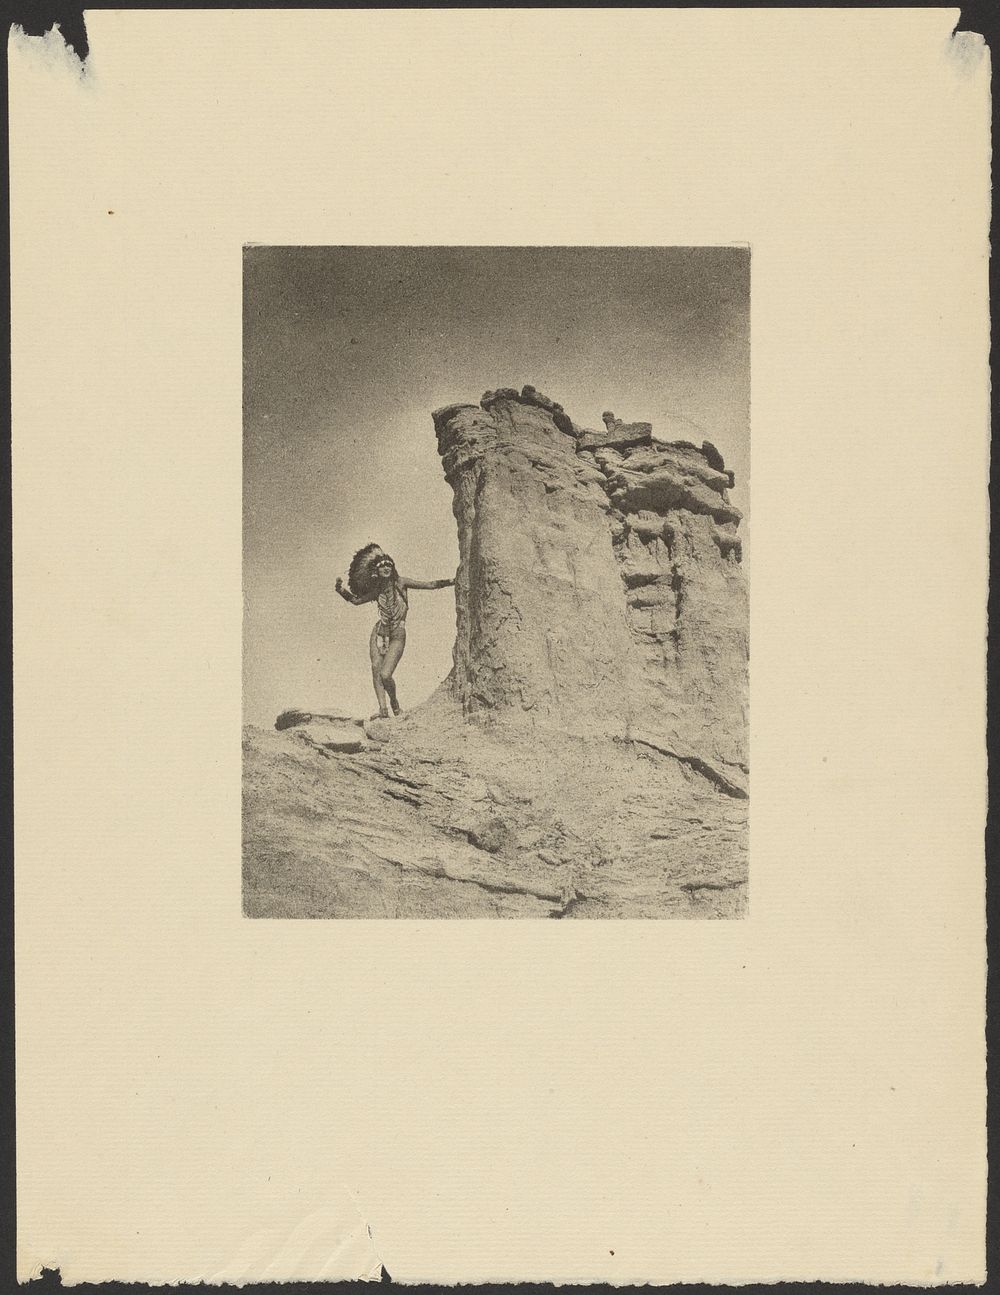 Woman in Indian Costume in the Desert Posed Next to a Large Rock Formation by Arthur F Kales